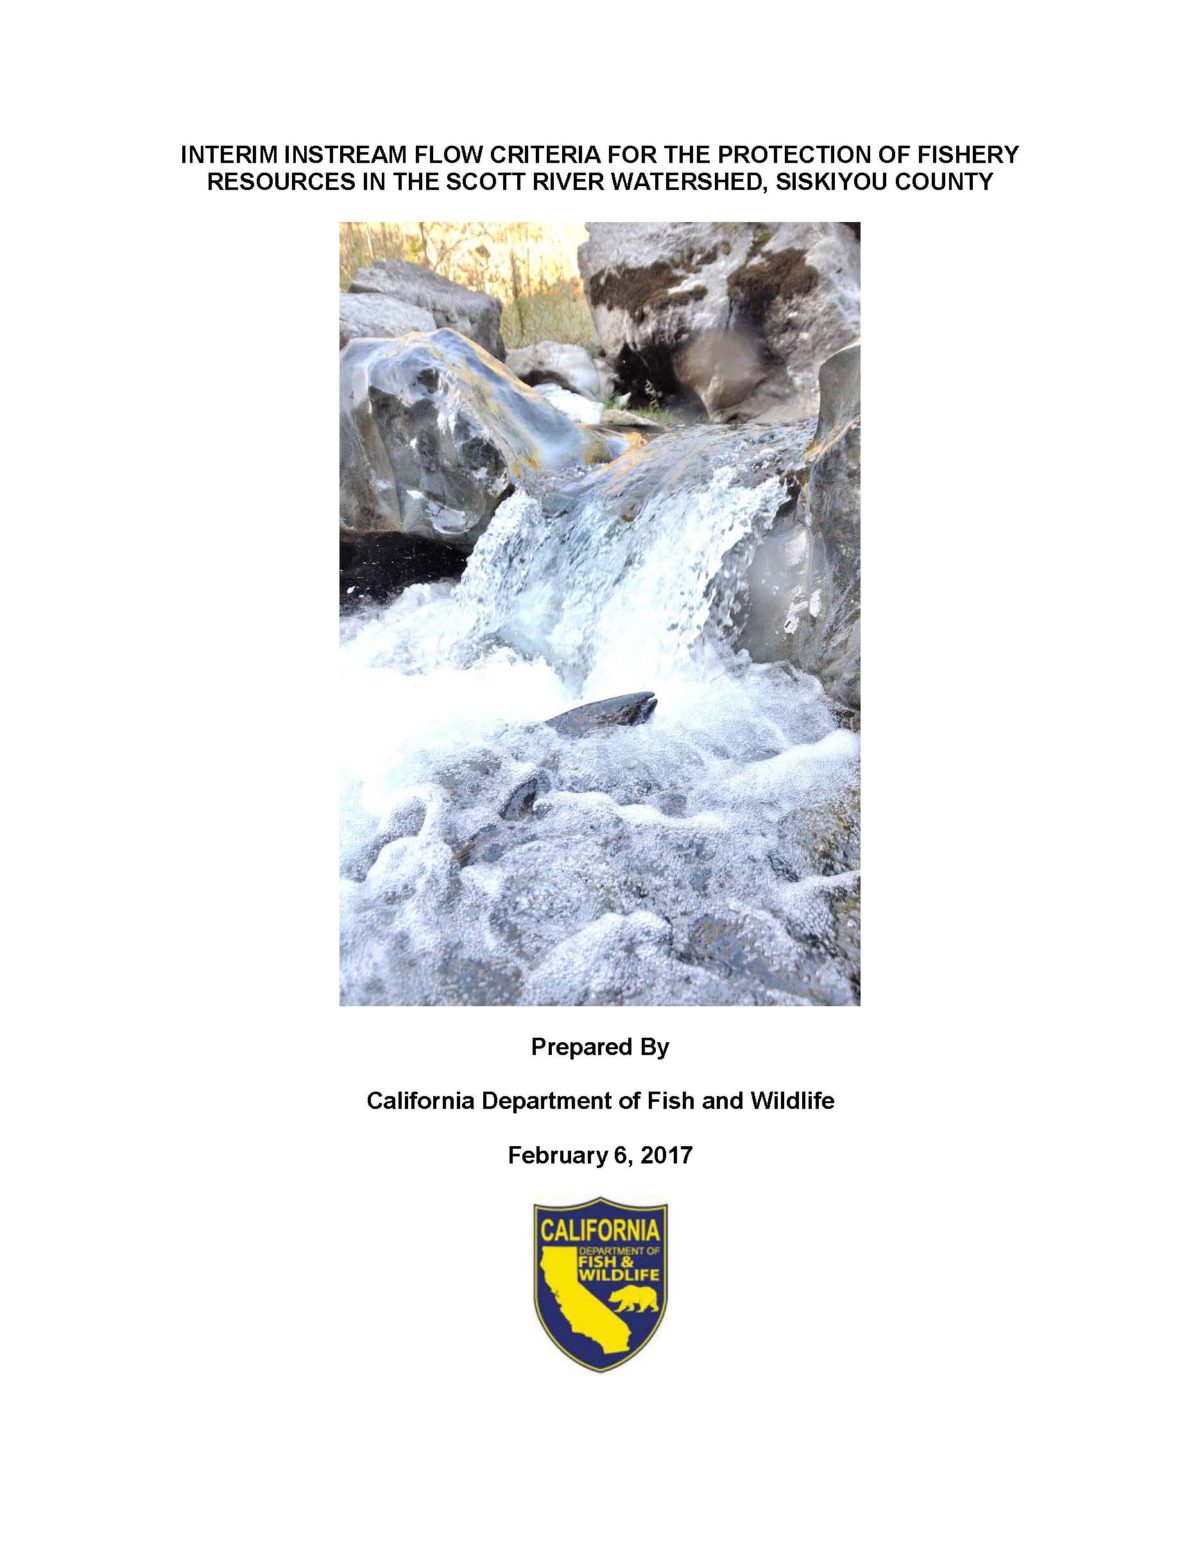 Interim instream flow criteria for the protection of fishery resources in the Scott River watershed, Siskiyou County